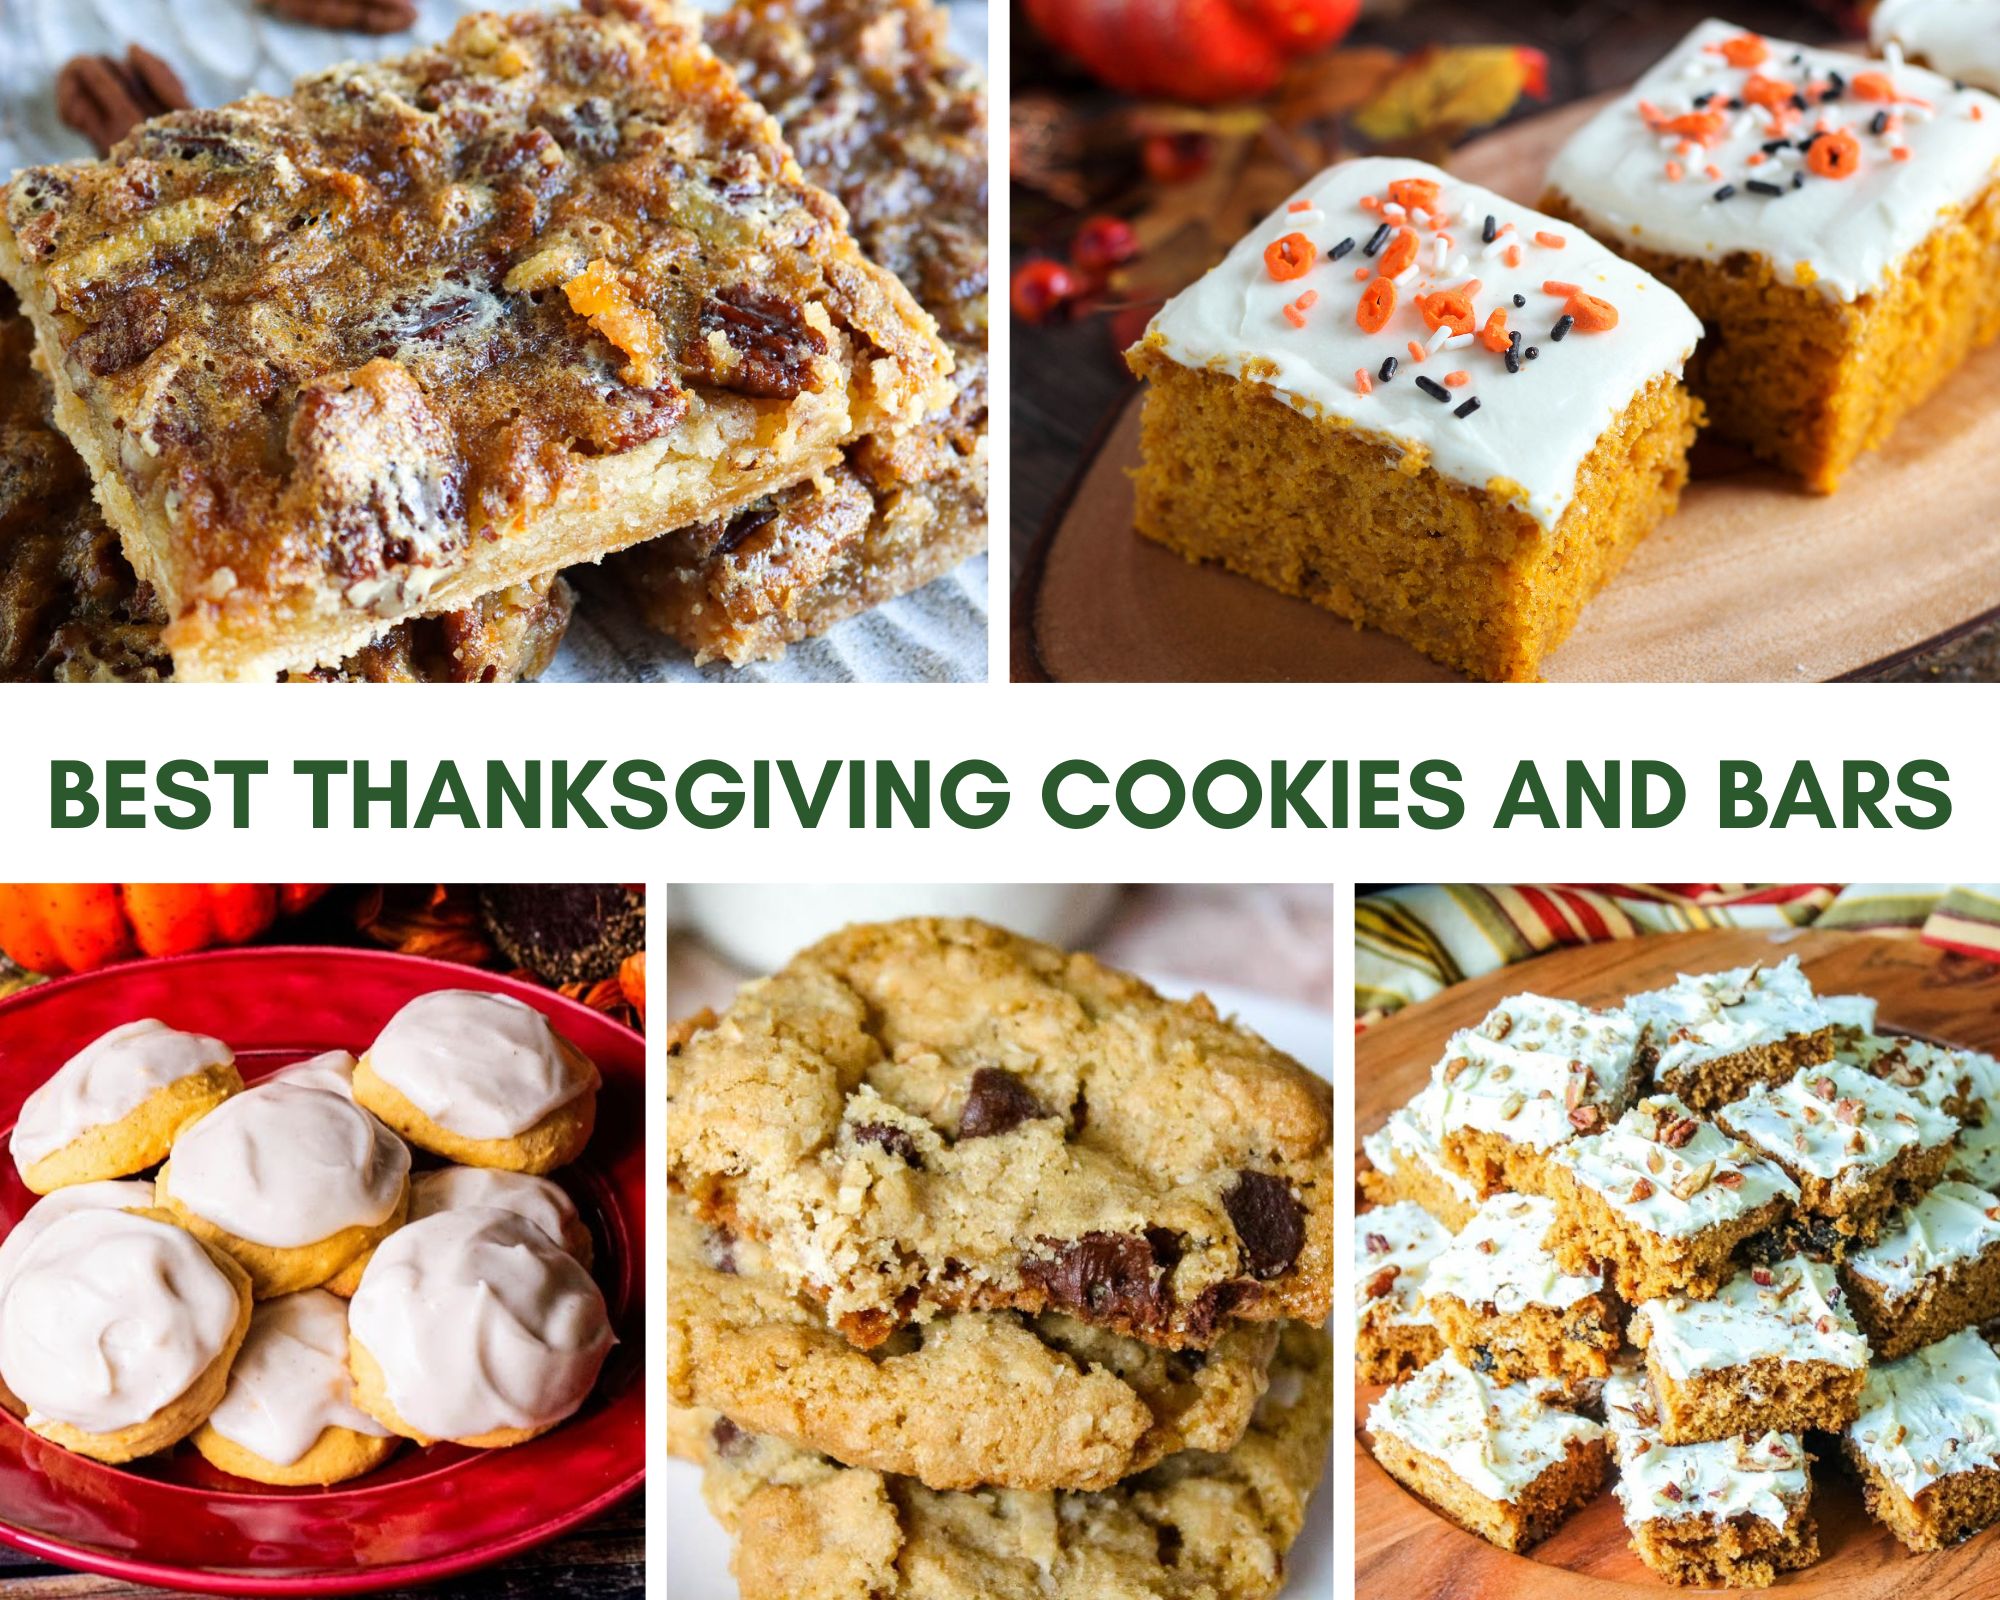 Best Thanksgiving Cookies and Bars